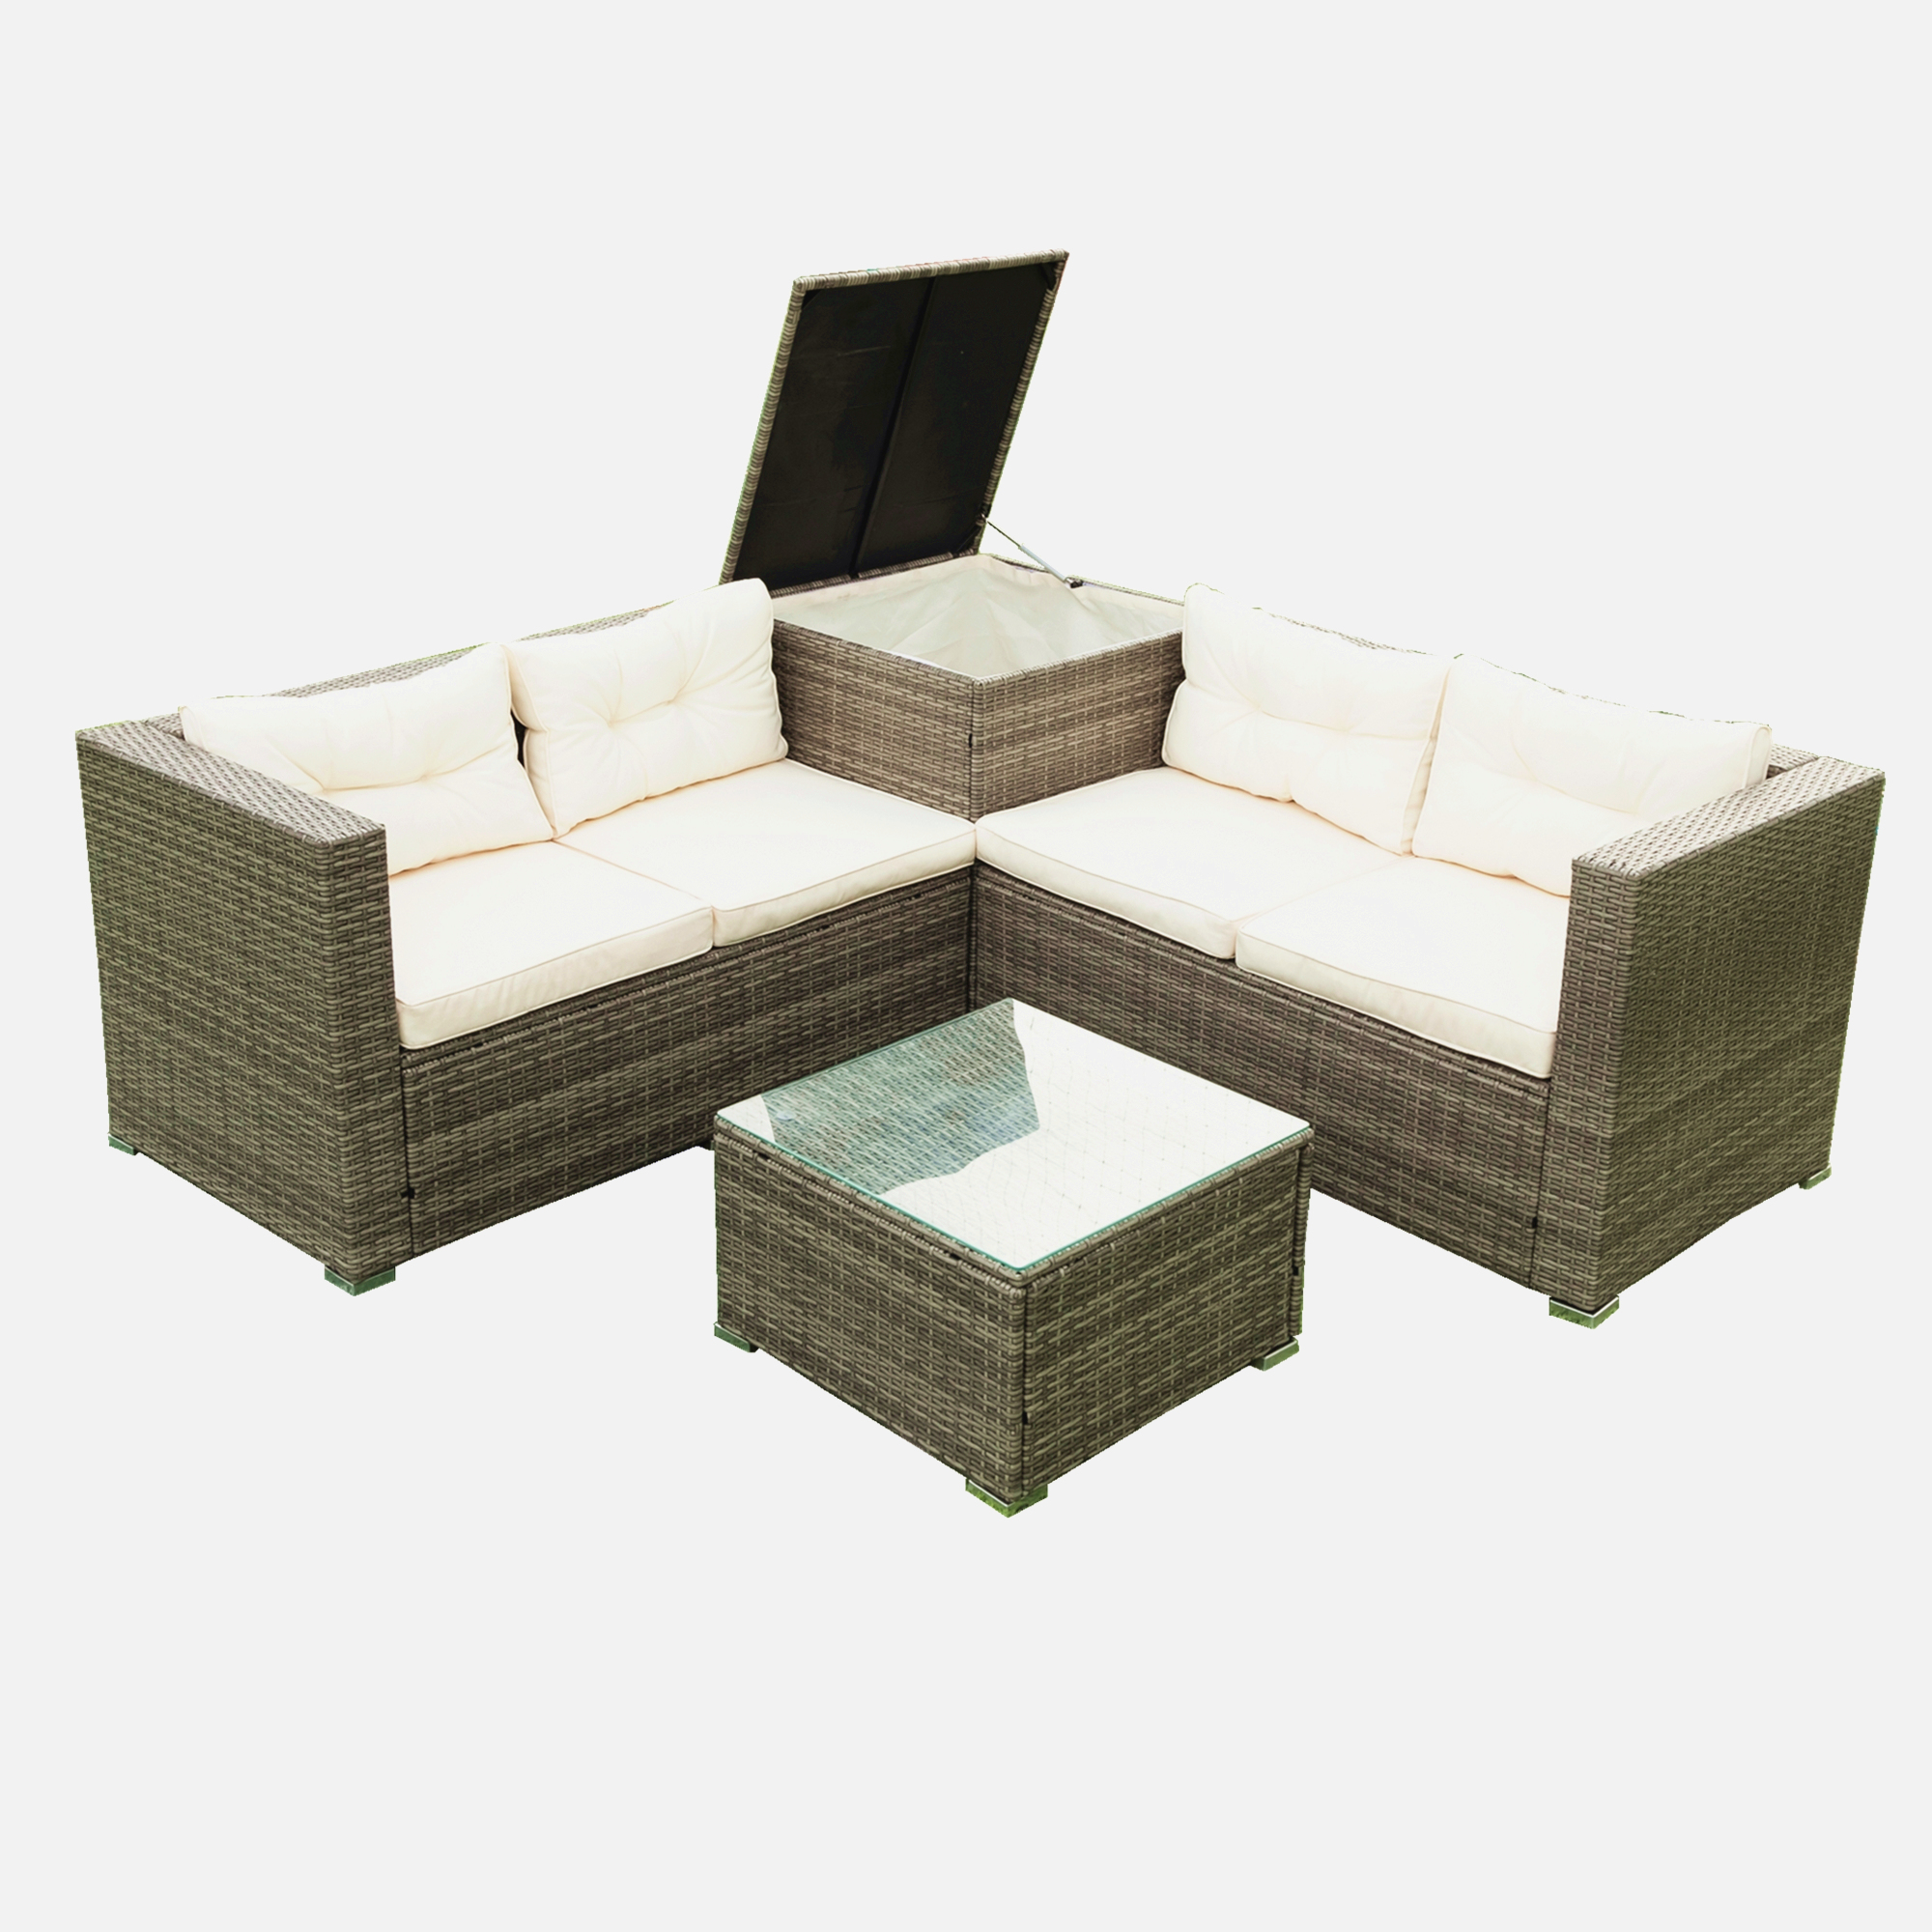 Patio Bistro Dining Chair Furniture Sets, 4 Pieces Patio Furniture Sets with Glass Coffee Table & Storage Box, Leisure Chair Conversation Set with Soft Cushion for Garden Poolside, Beige, SS2164 - image 1 of 9